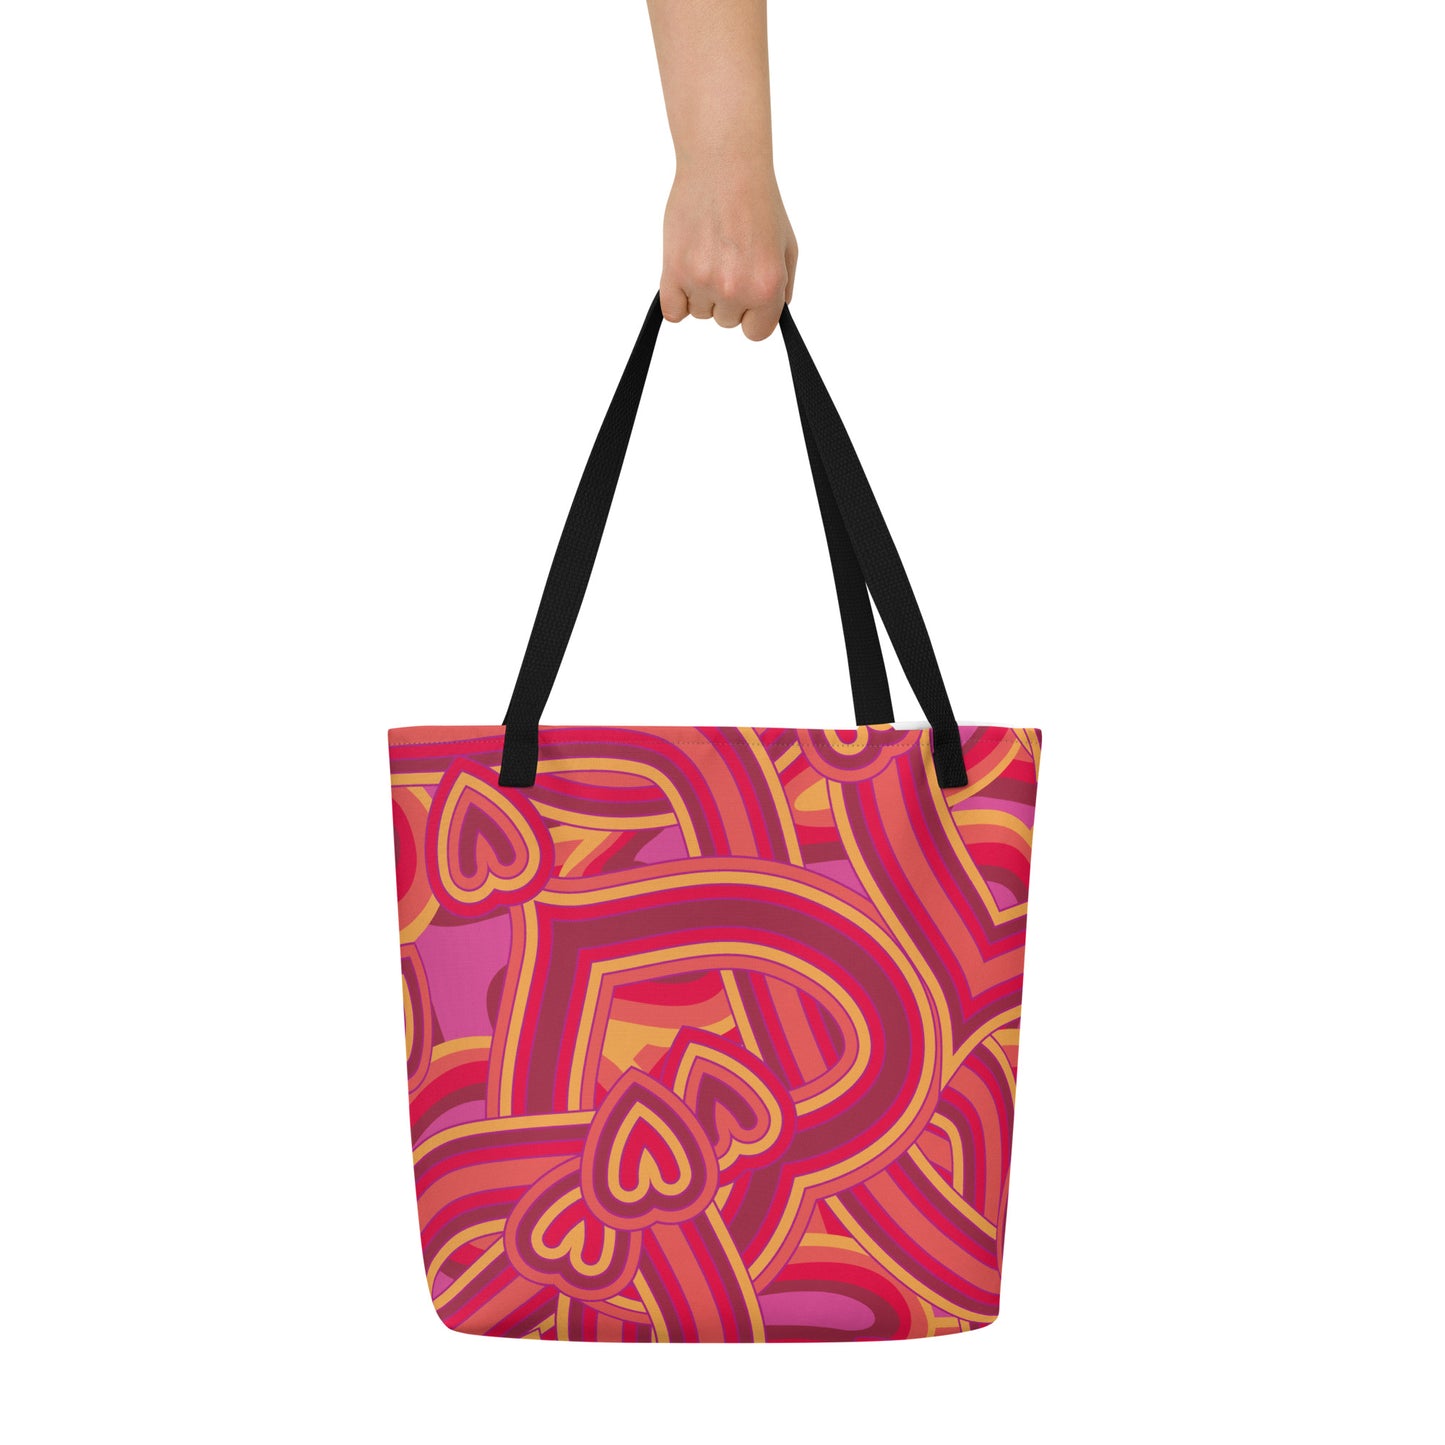 TIME OF VIBES - Large Tote Bag FULL OF LOVE - €45.00